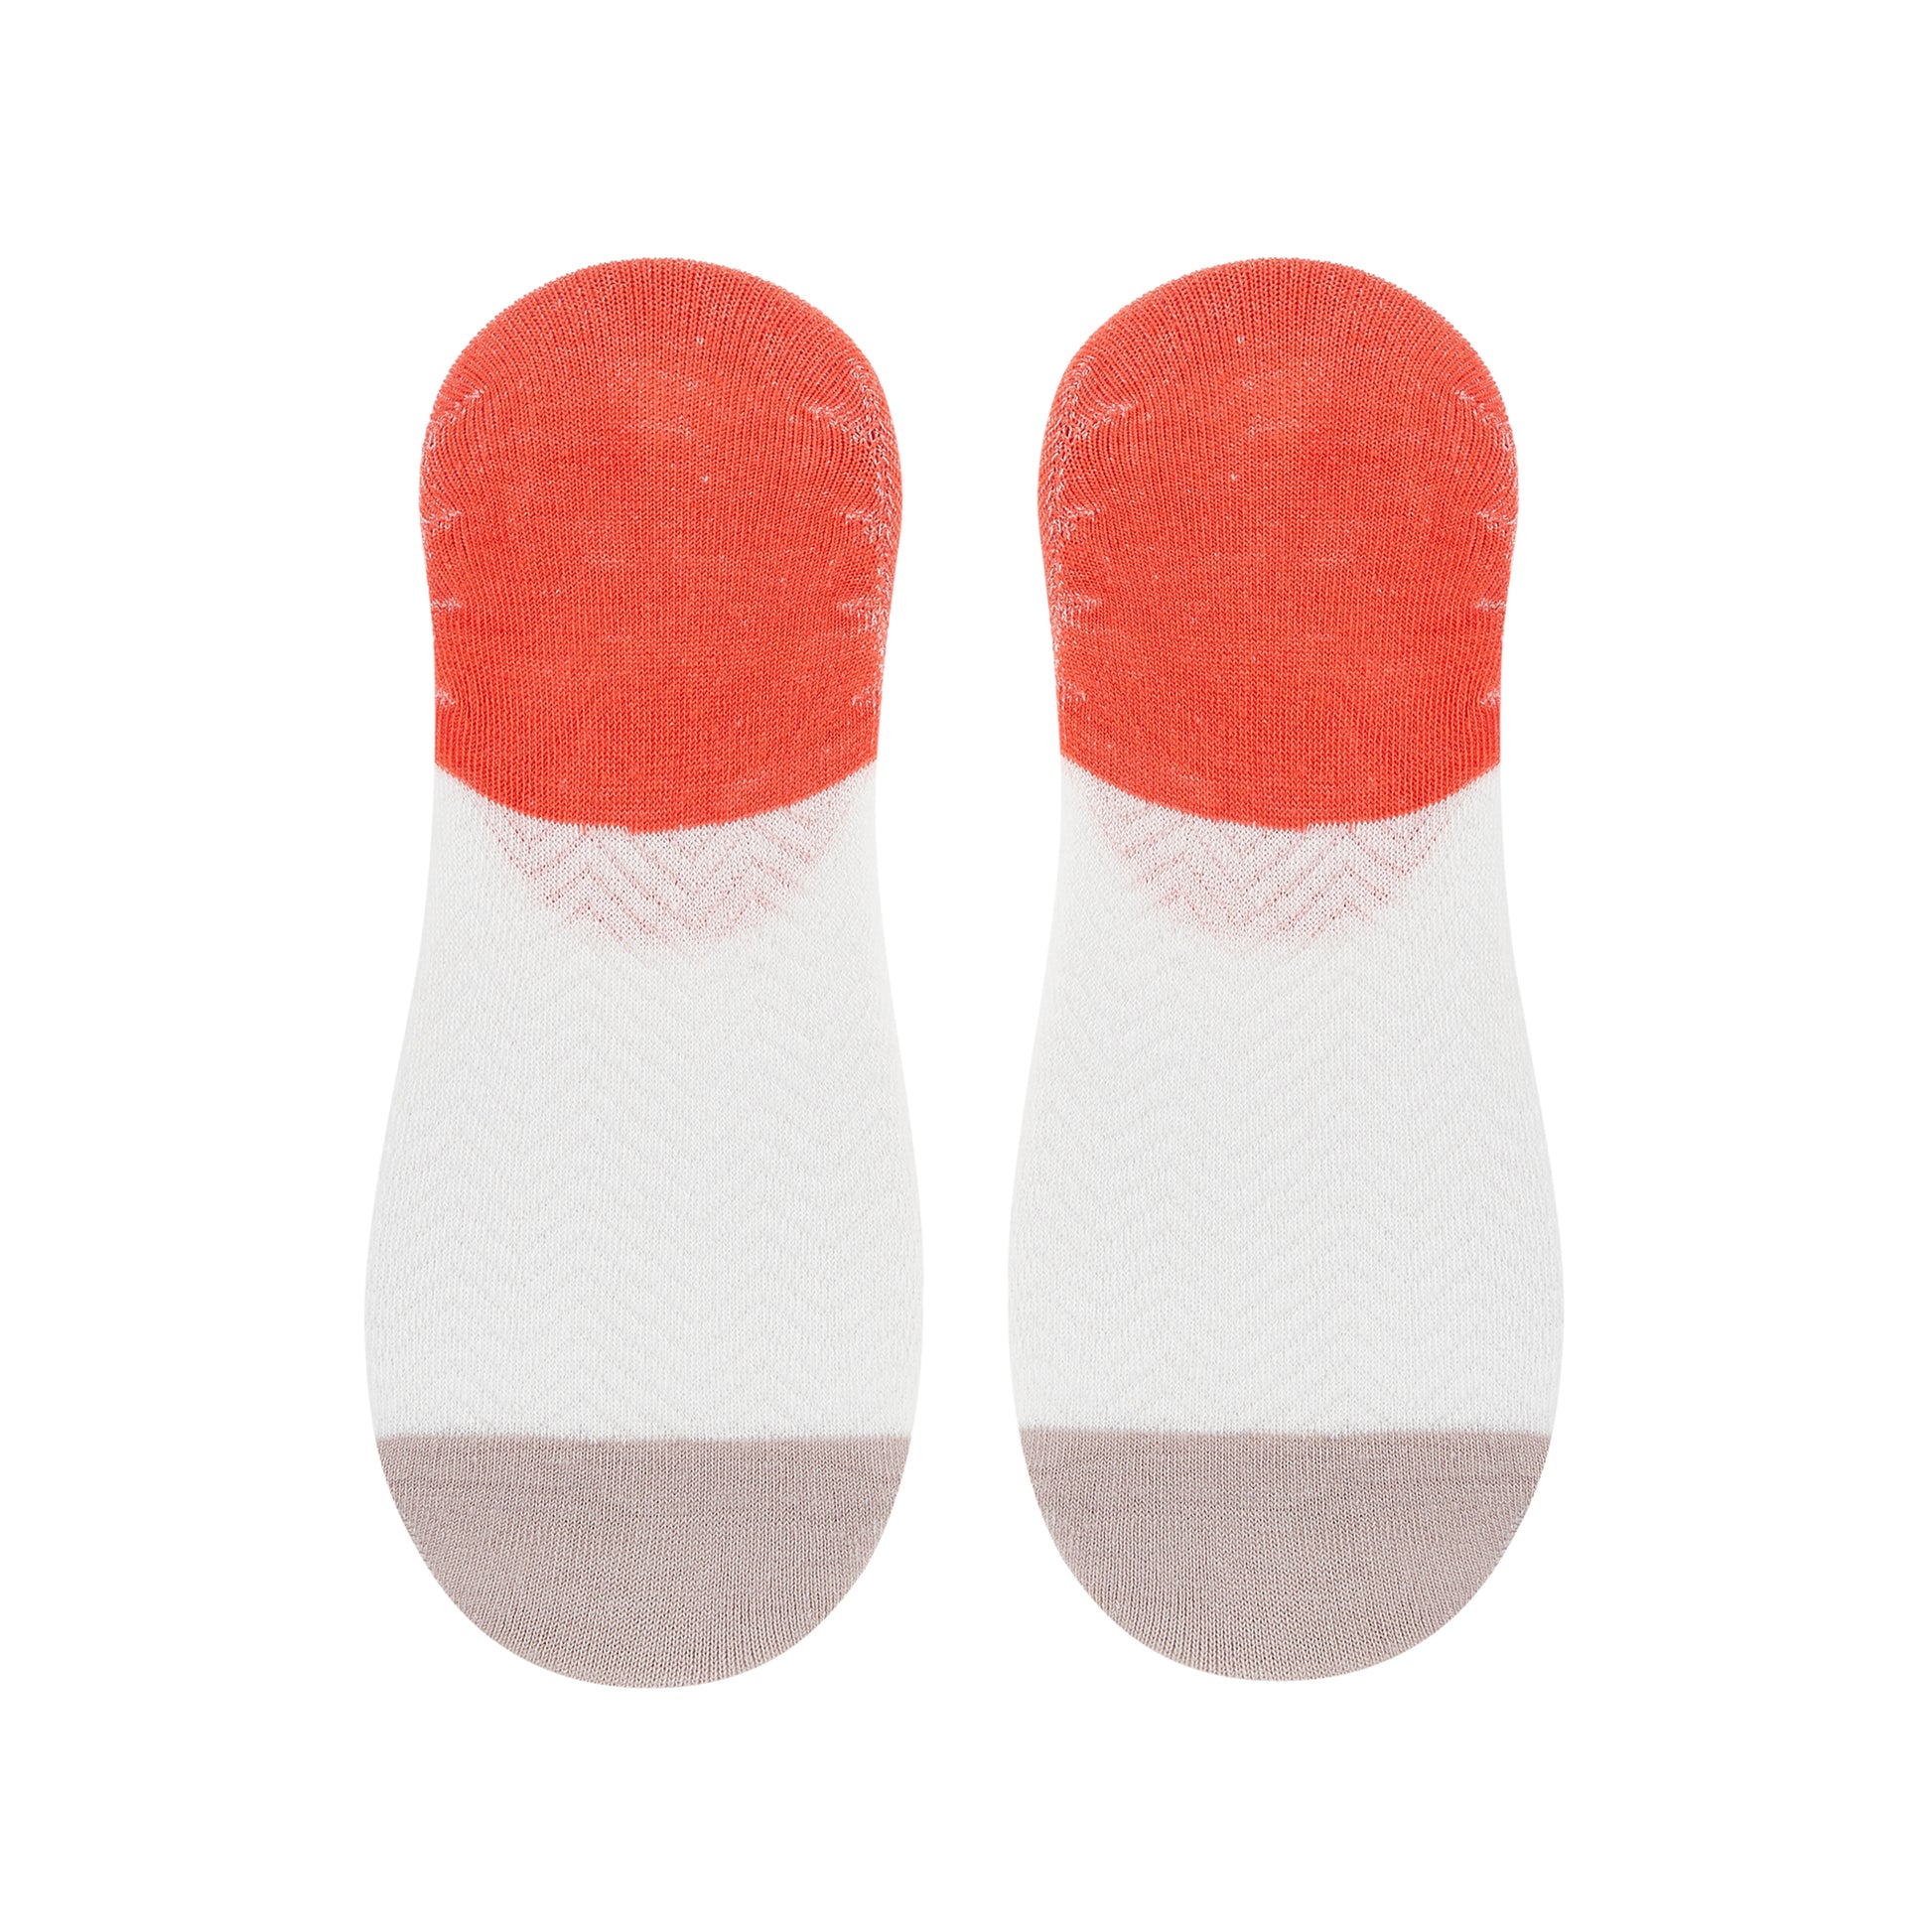 Smiley Face Invisible Foot Socks - IDENTITY Apparel Shop